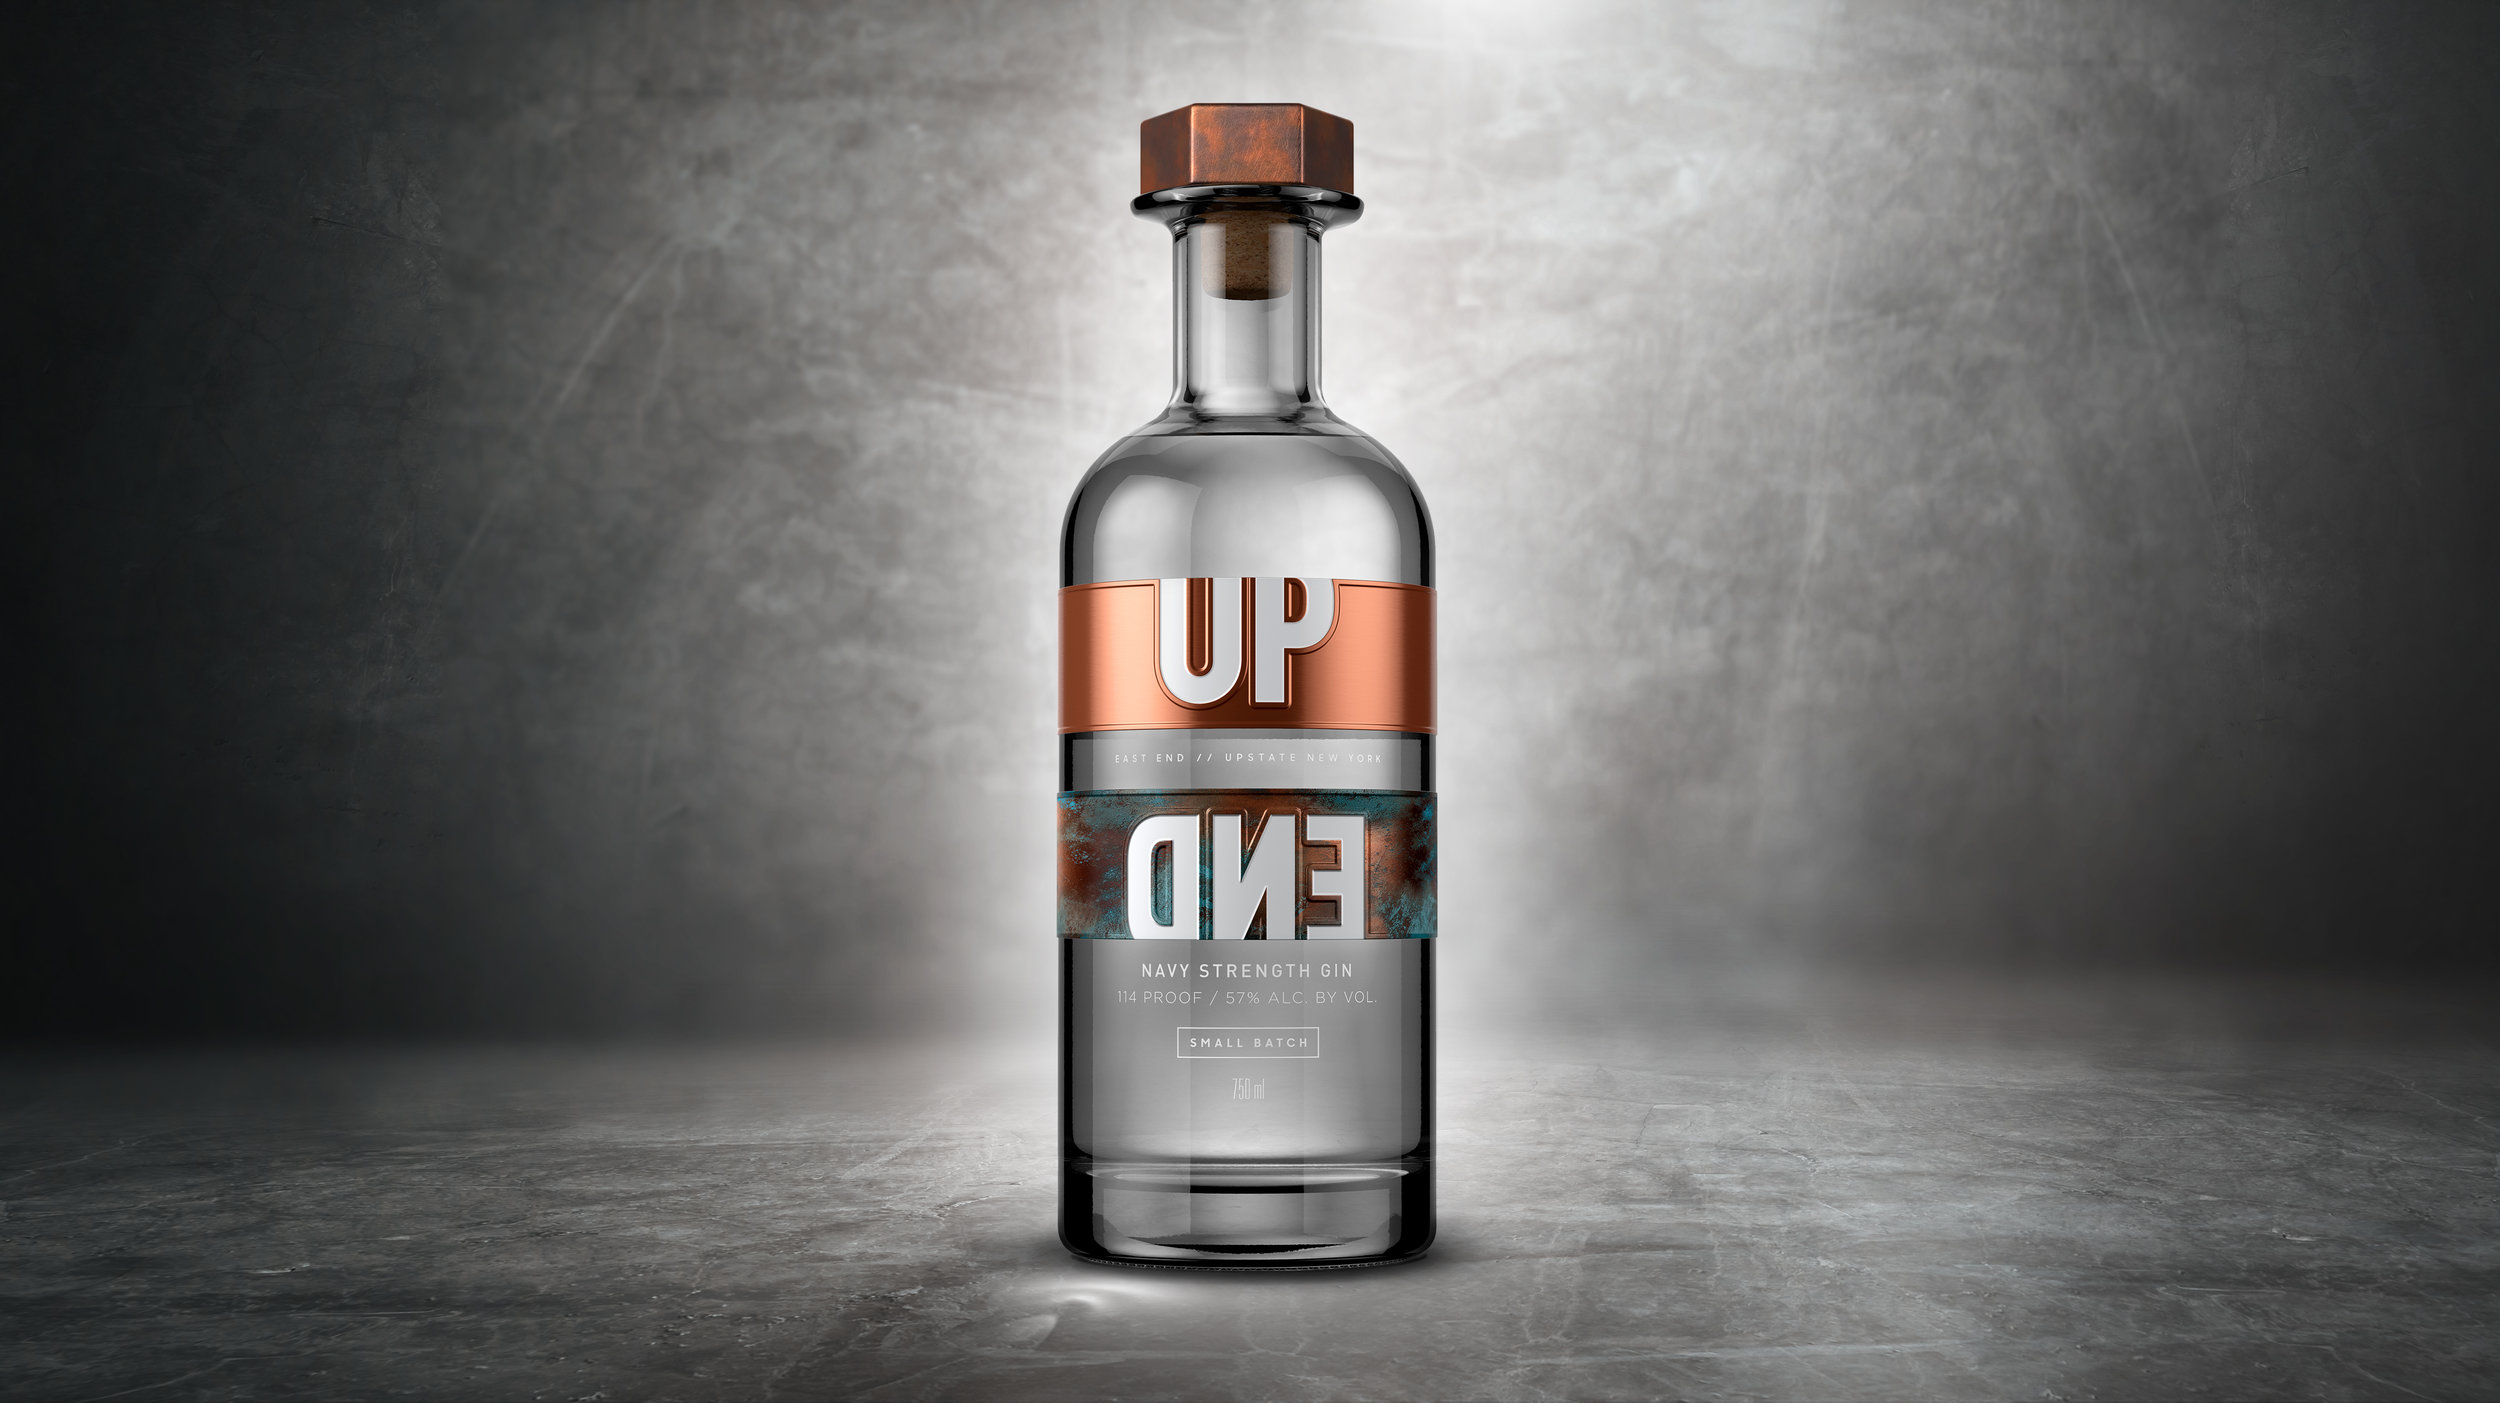 UP END Gin